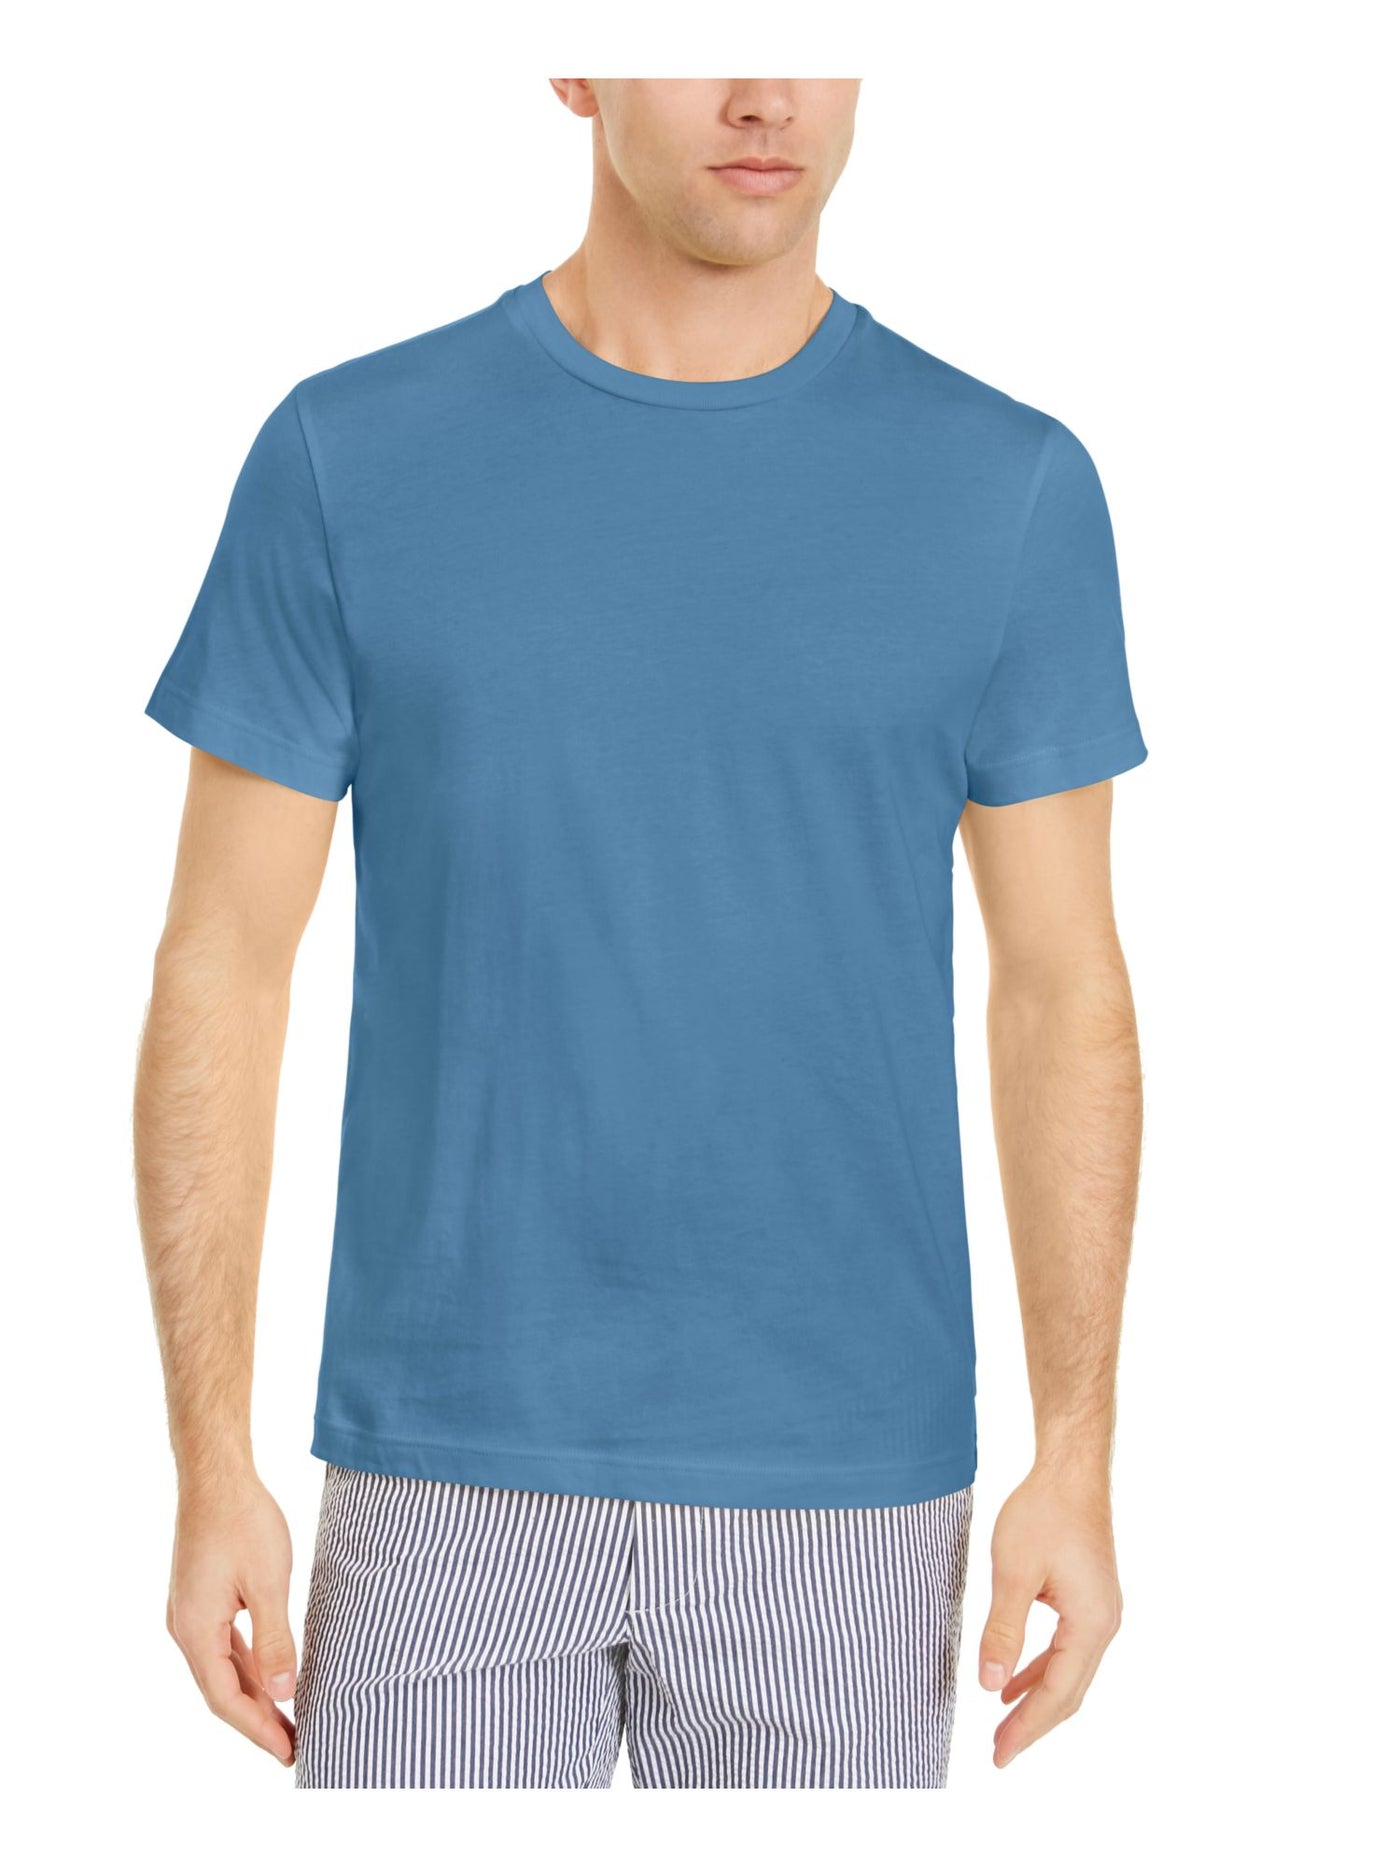 CLUBROOM Mens Blue Classic Fit Moisture Wicking T-Shirt S